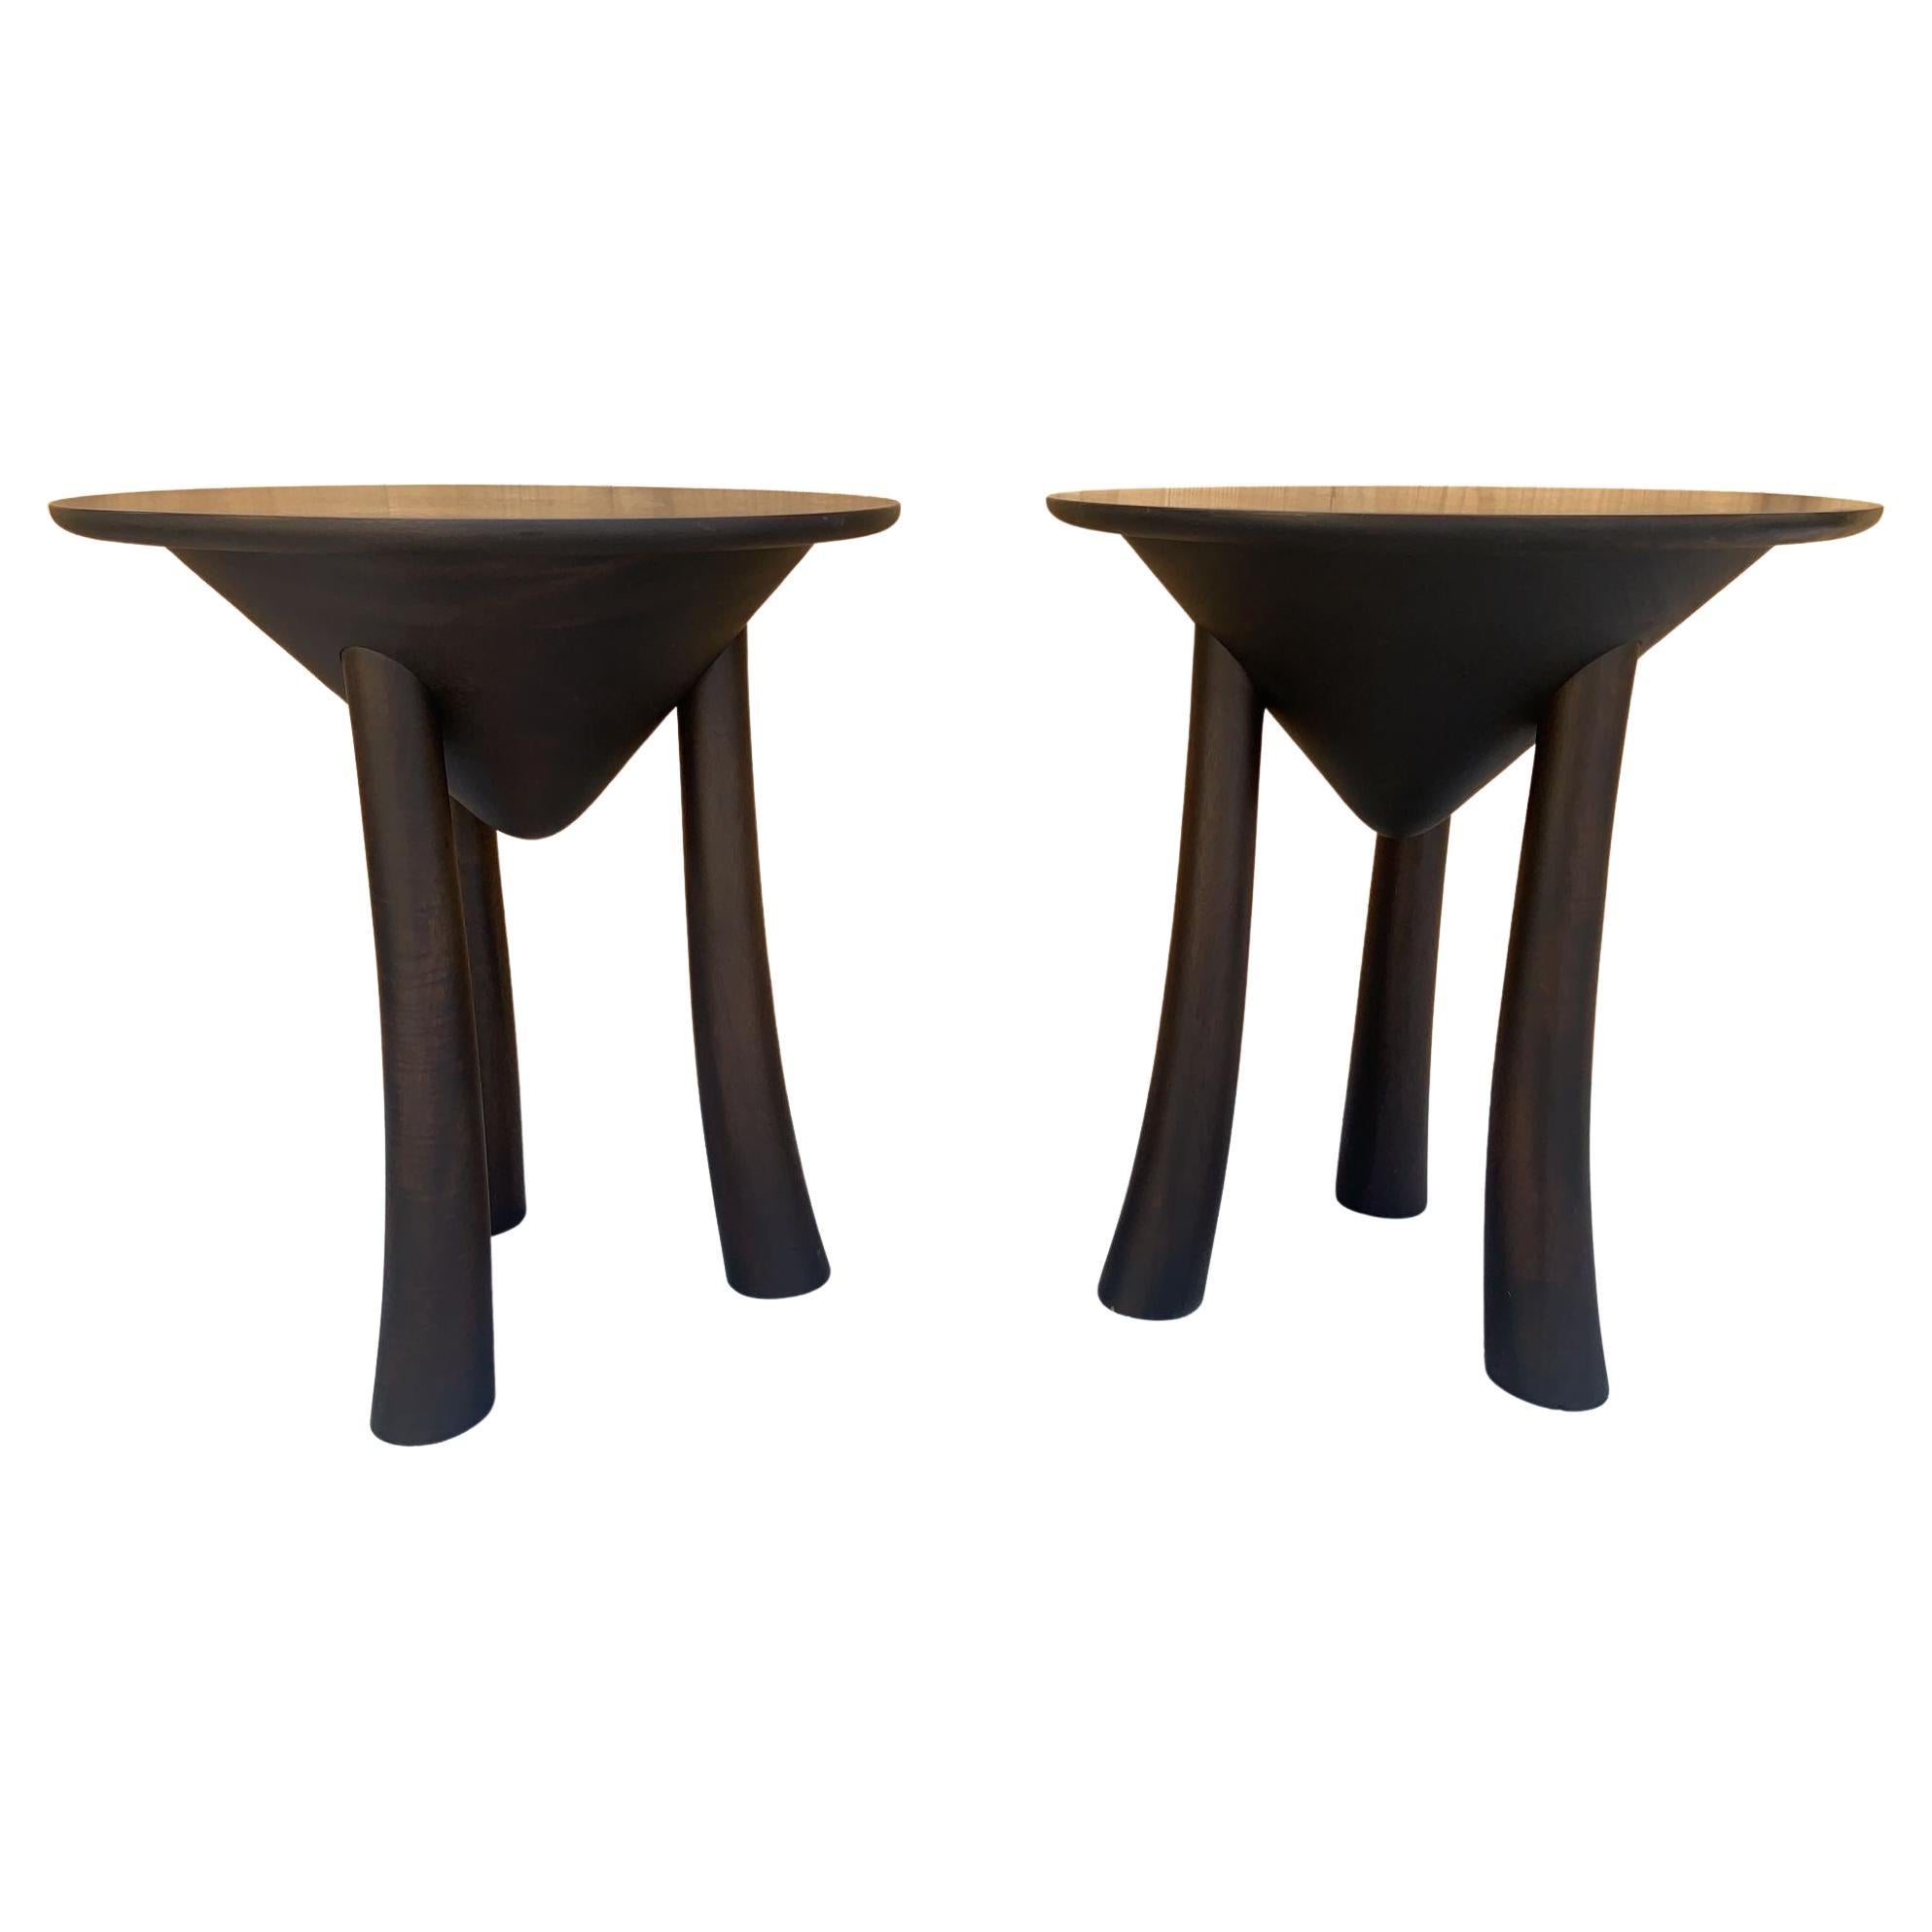 Vintage Modern Minimalist Sculpted 3 Arched Leg Side Table, Pair